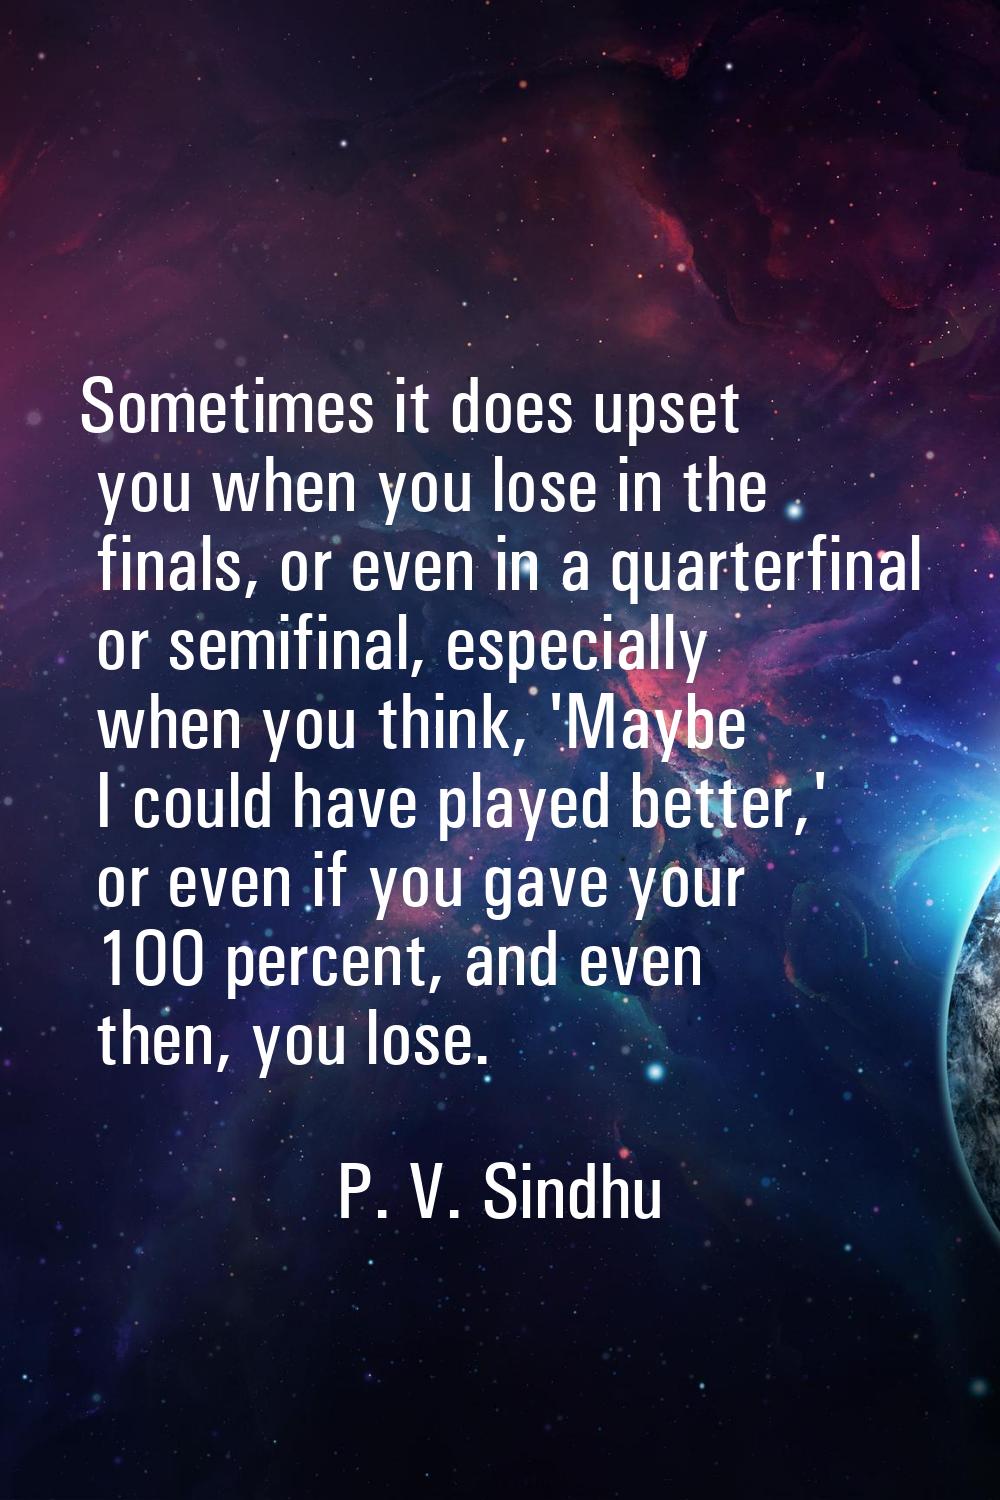 Sometimes it does upset you when you lose in the finals, or even in a quarterfinal or semifinal, es